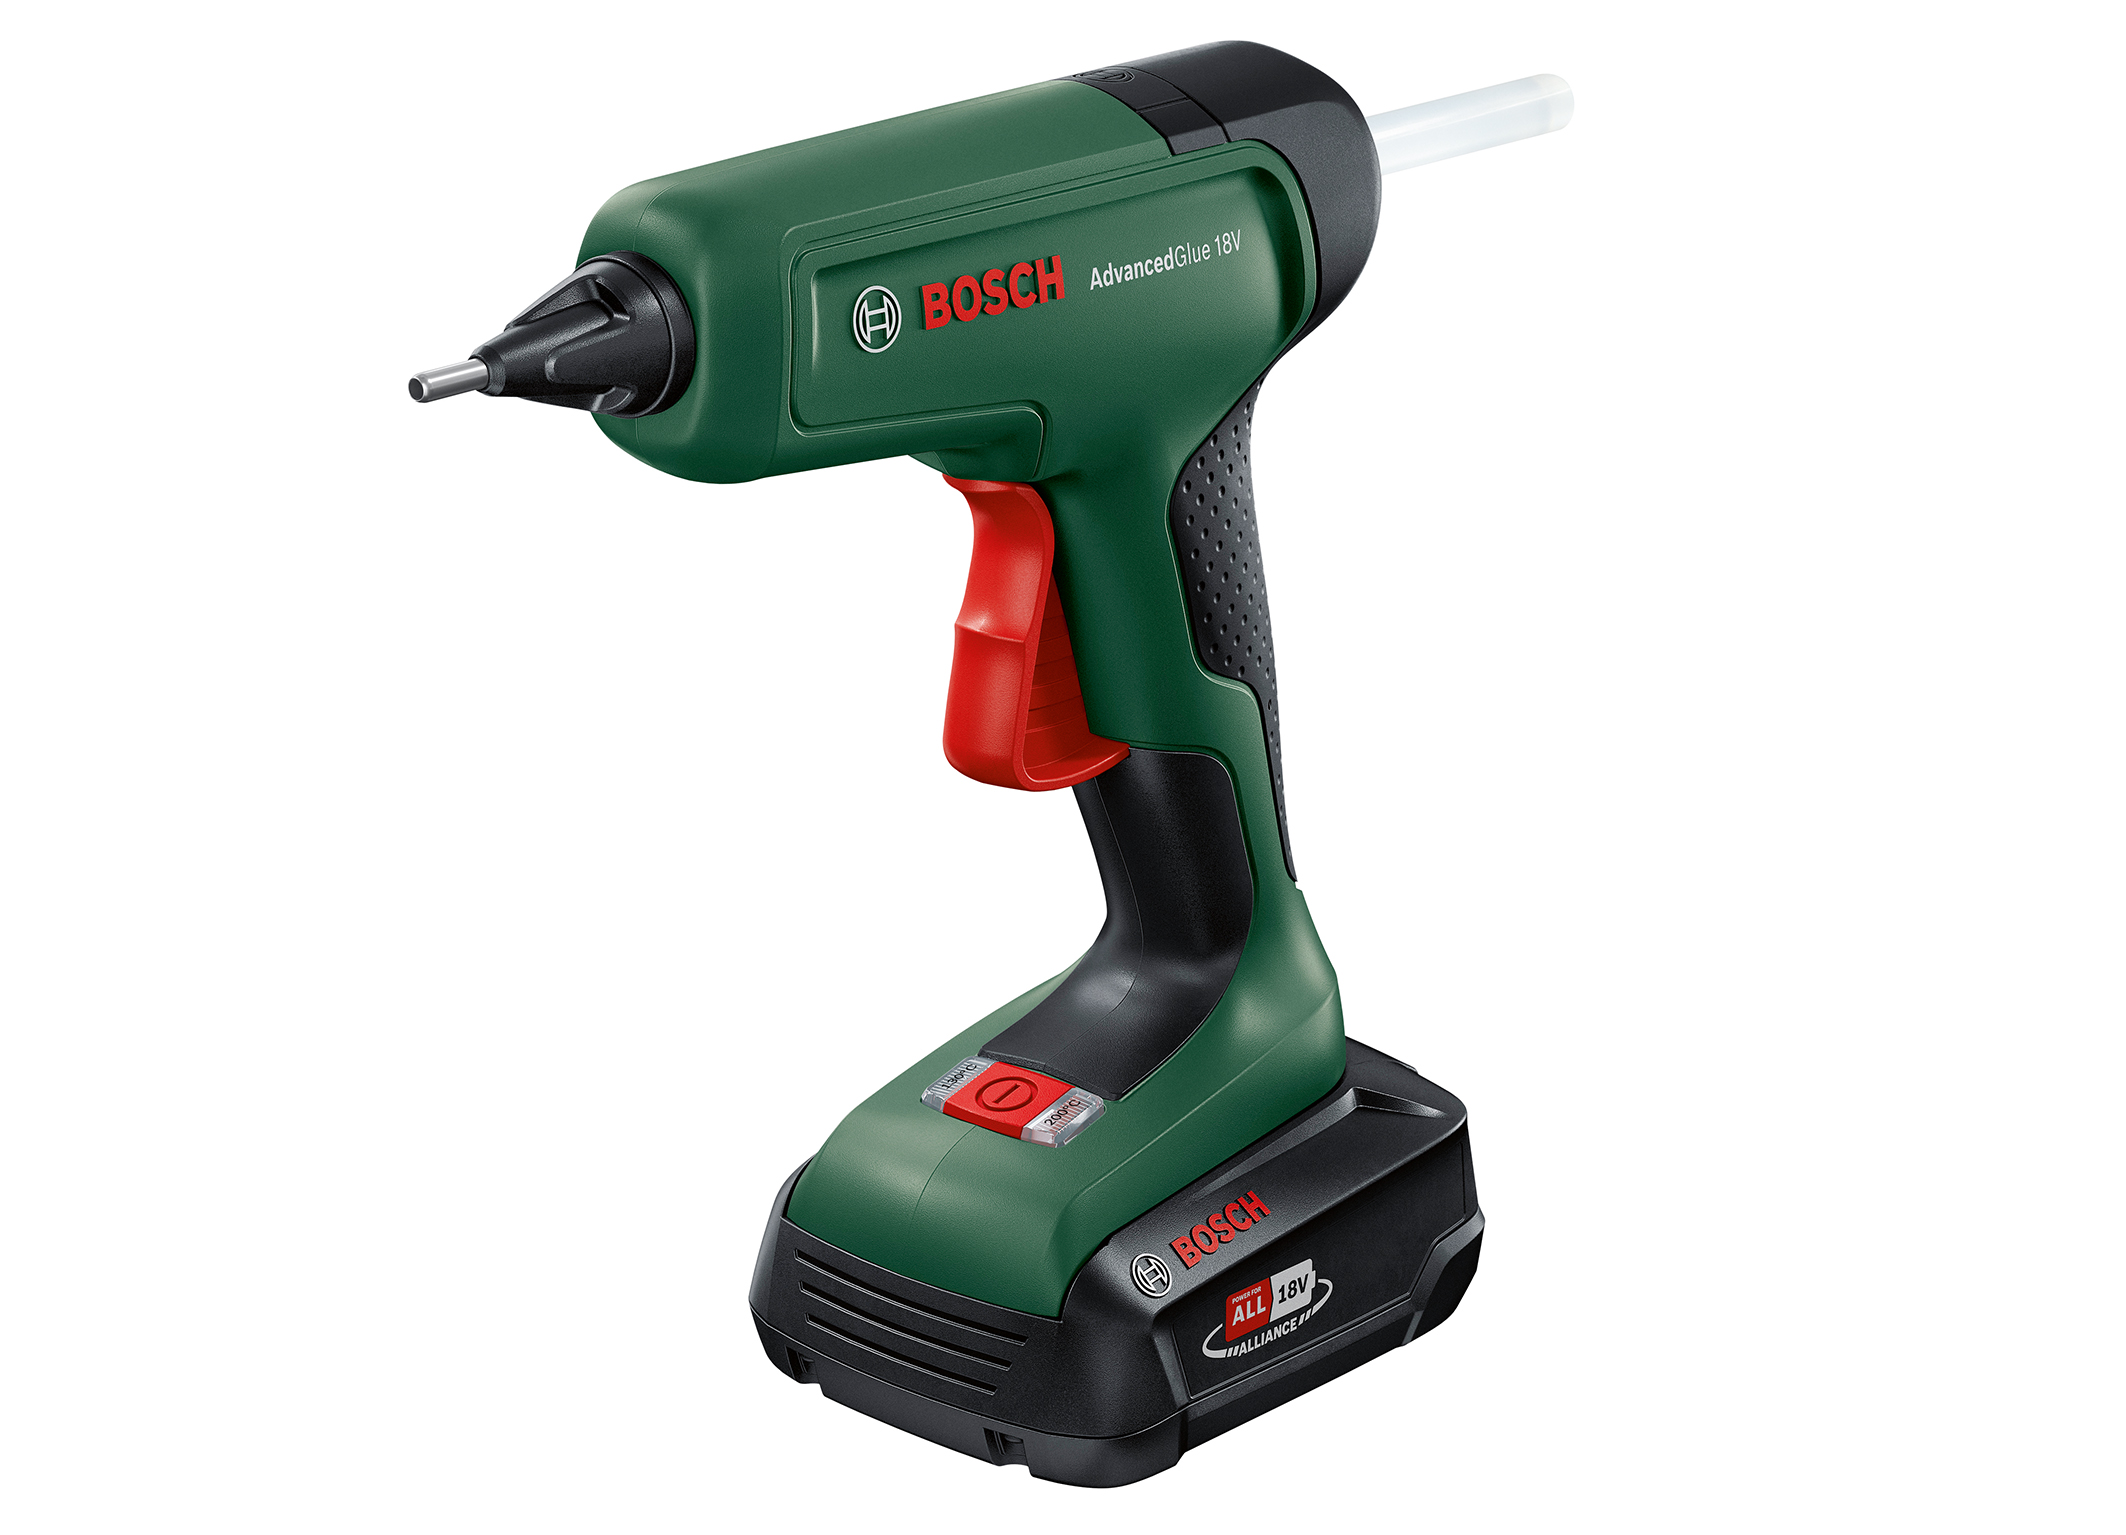 Extension of the ‘18V Power for All System’: Cordless glue gun AdvancedGlue 18V from Bosch 